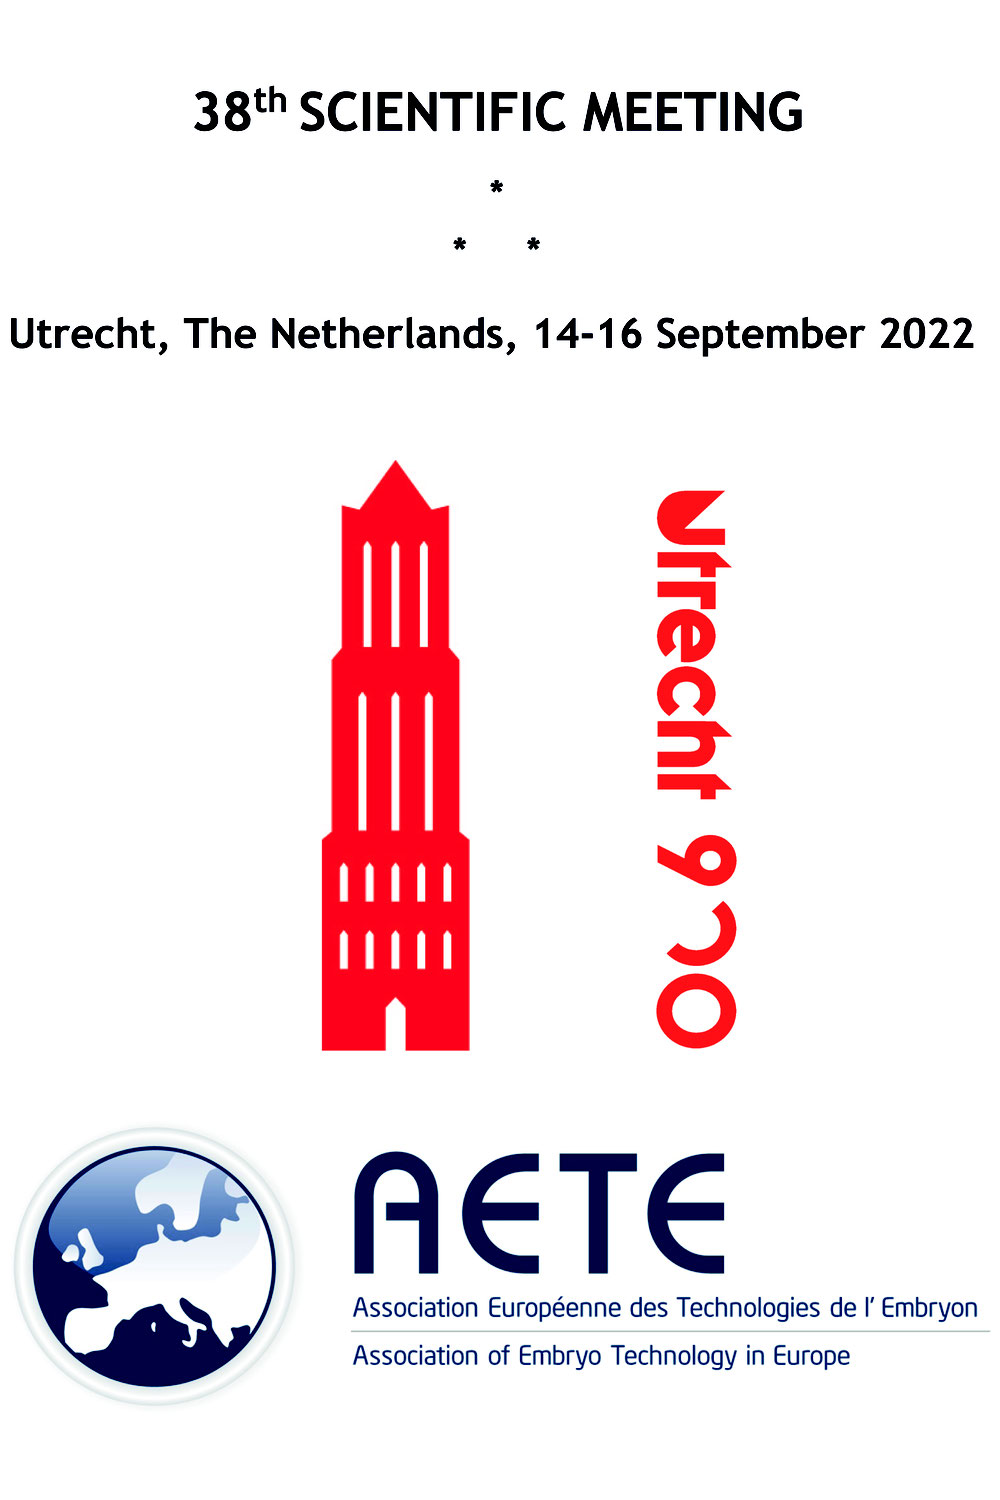 You are still in time to join the AETE meeting!